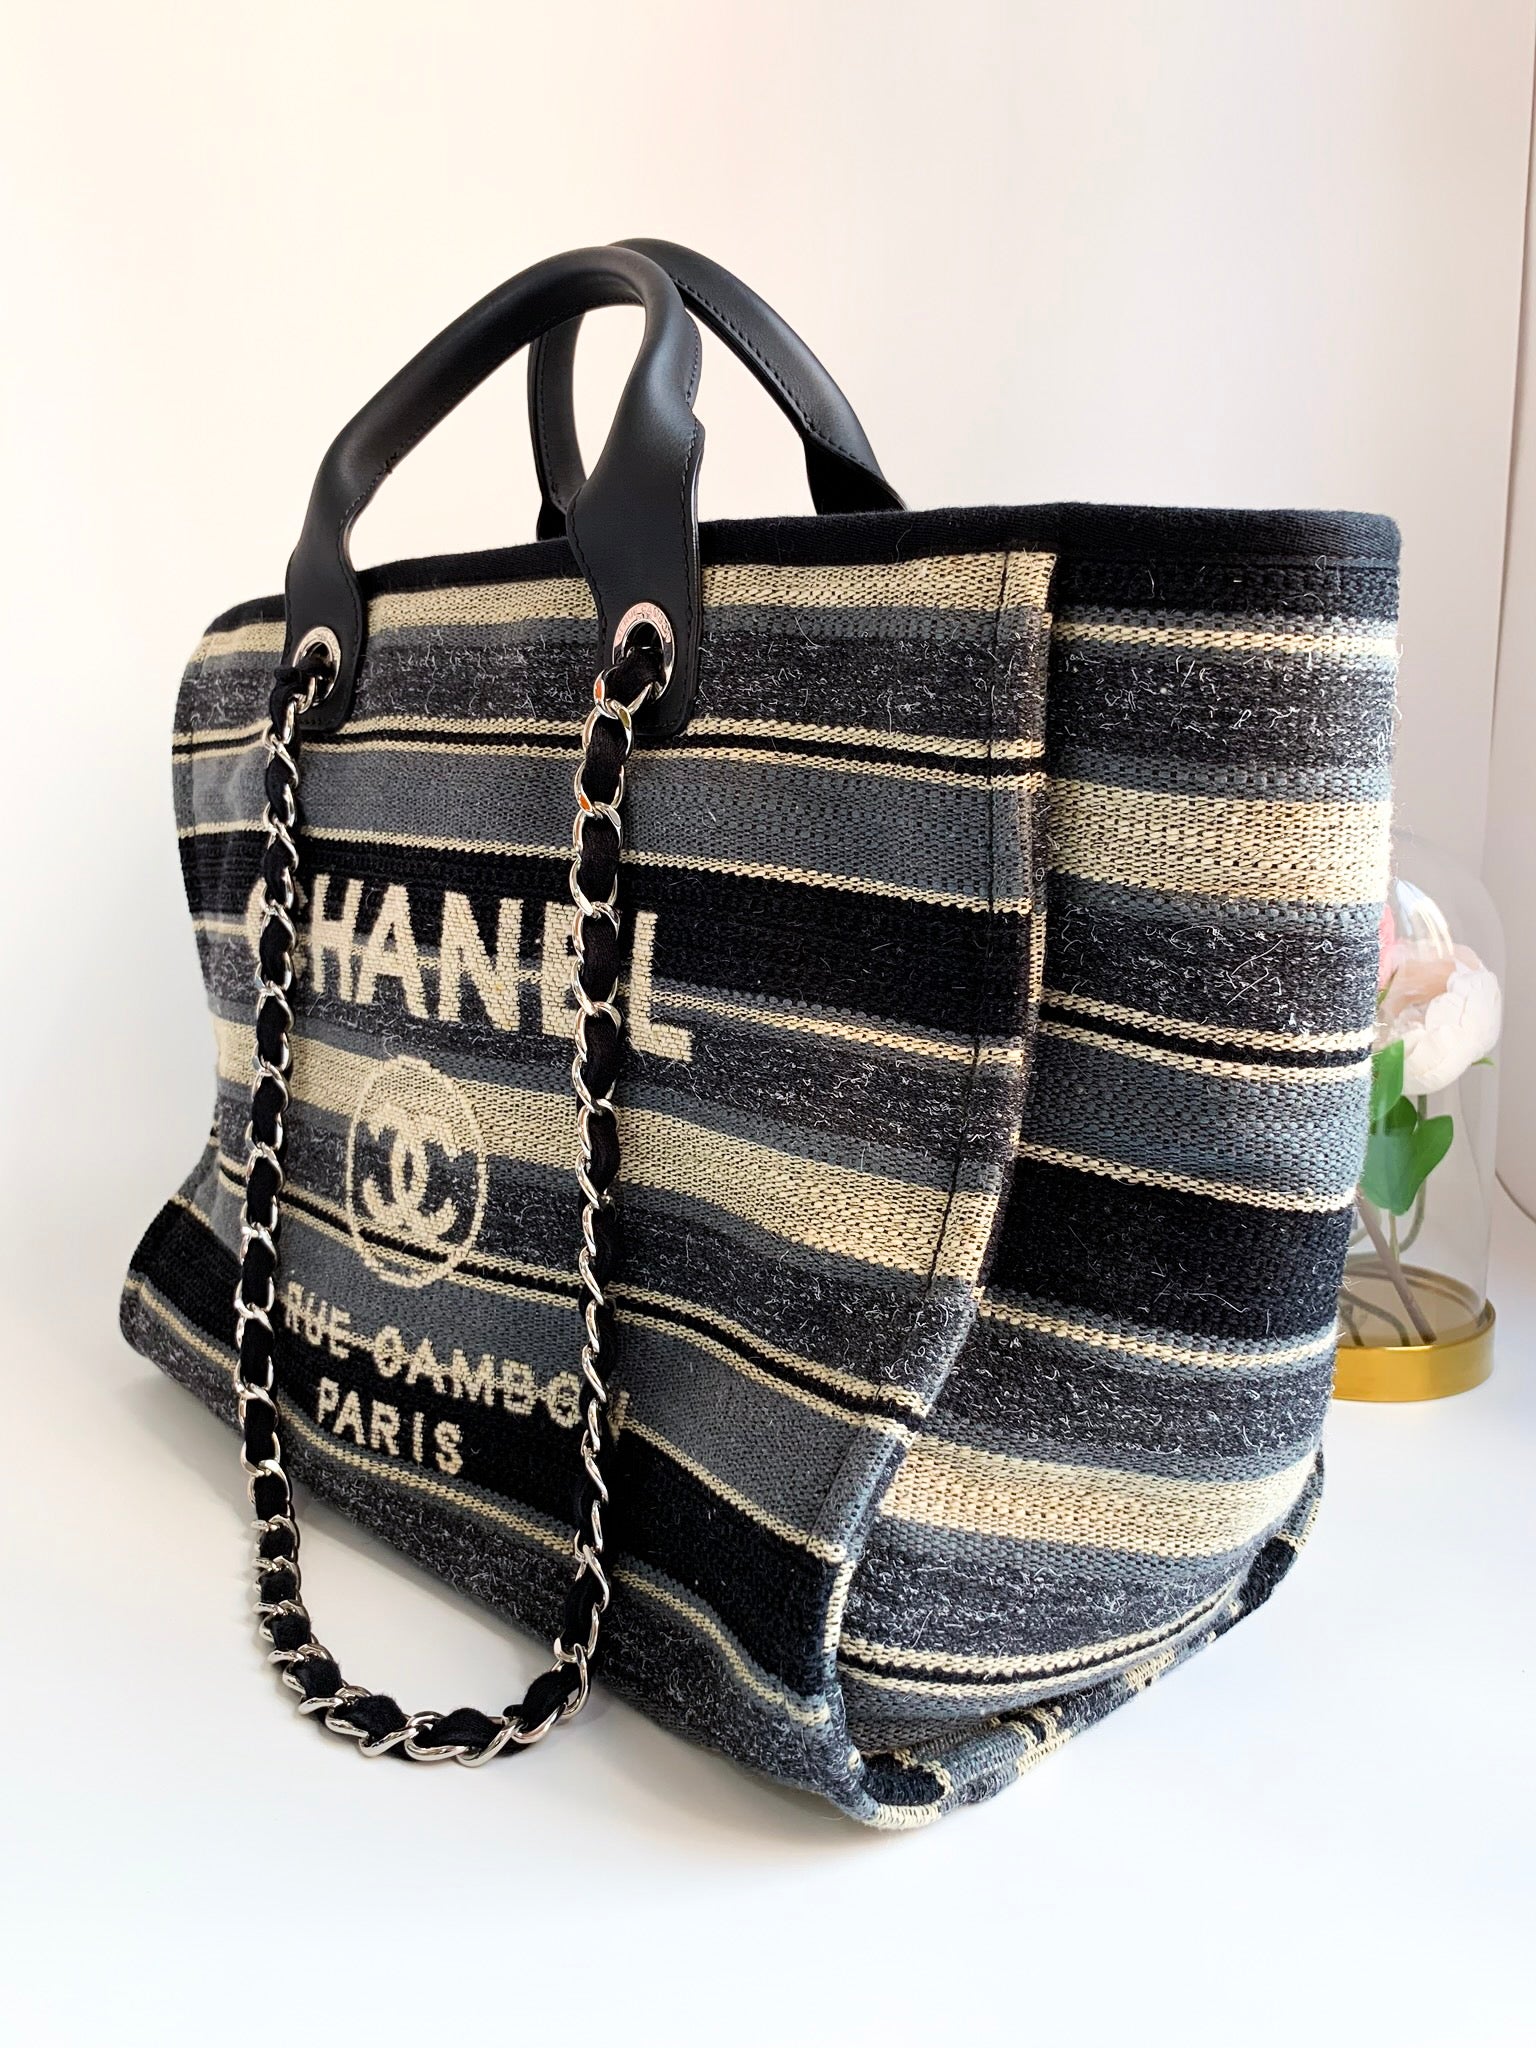 Chanel Large Deauville Tote  Rent Chanel Handbags for $195/month